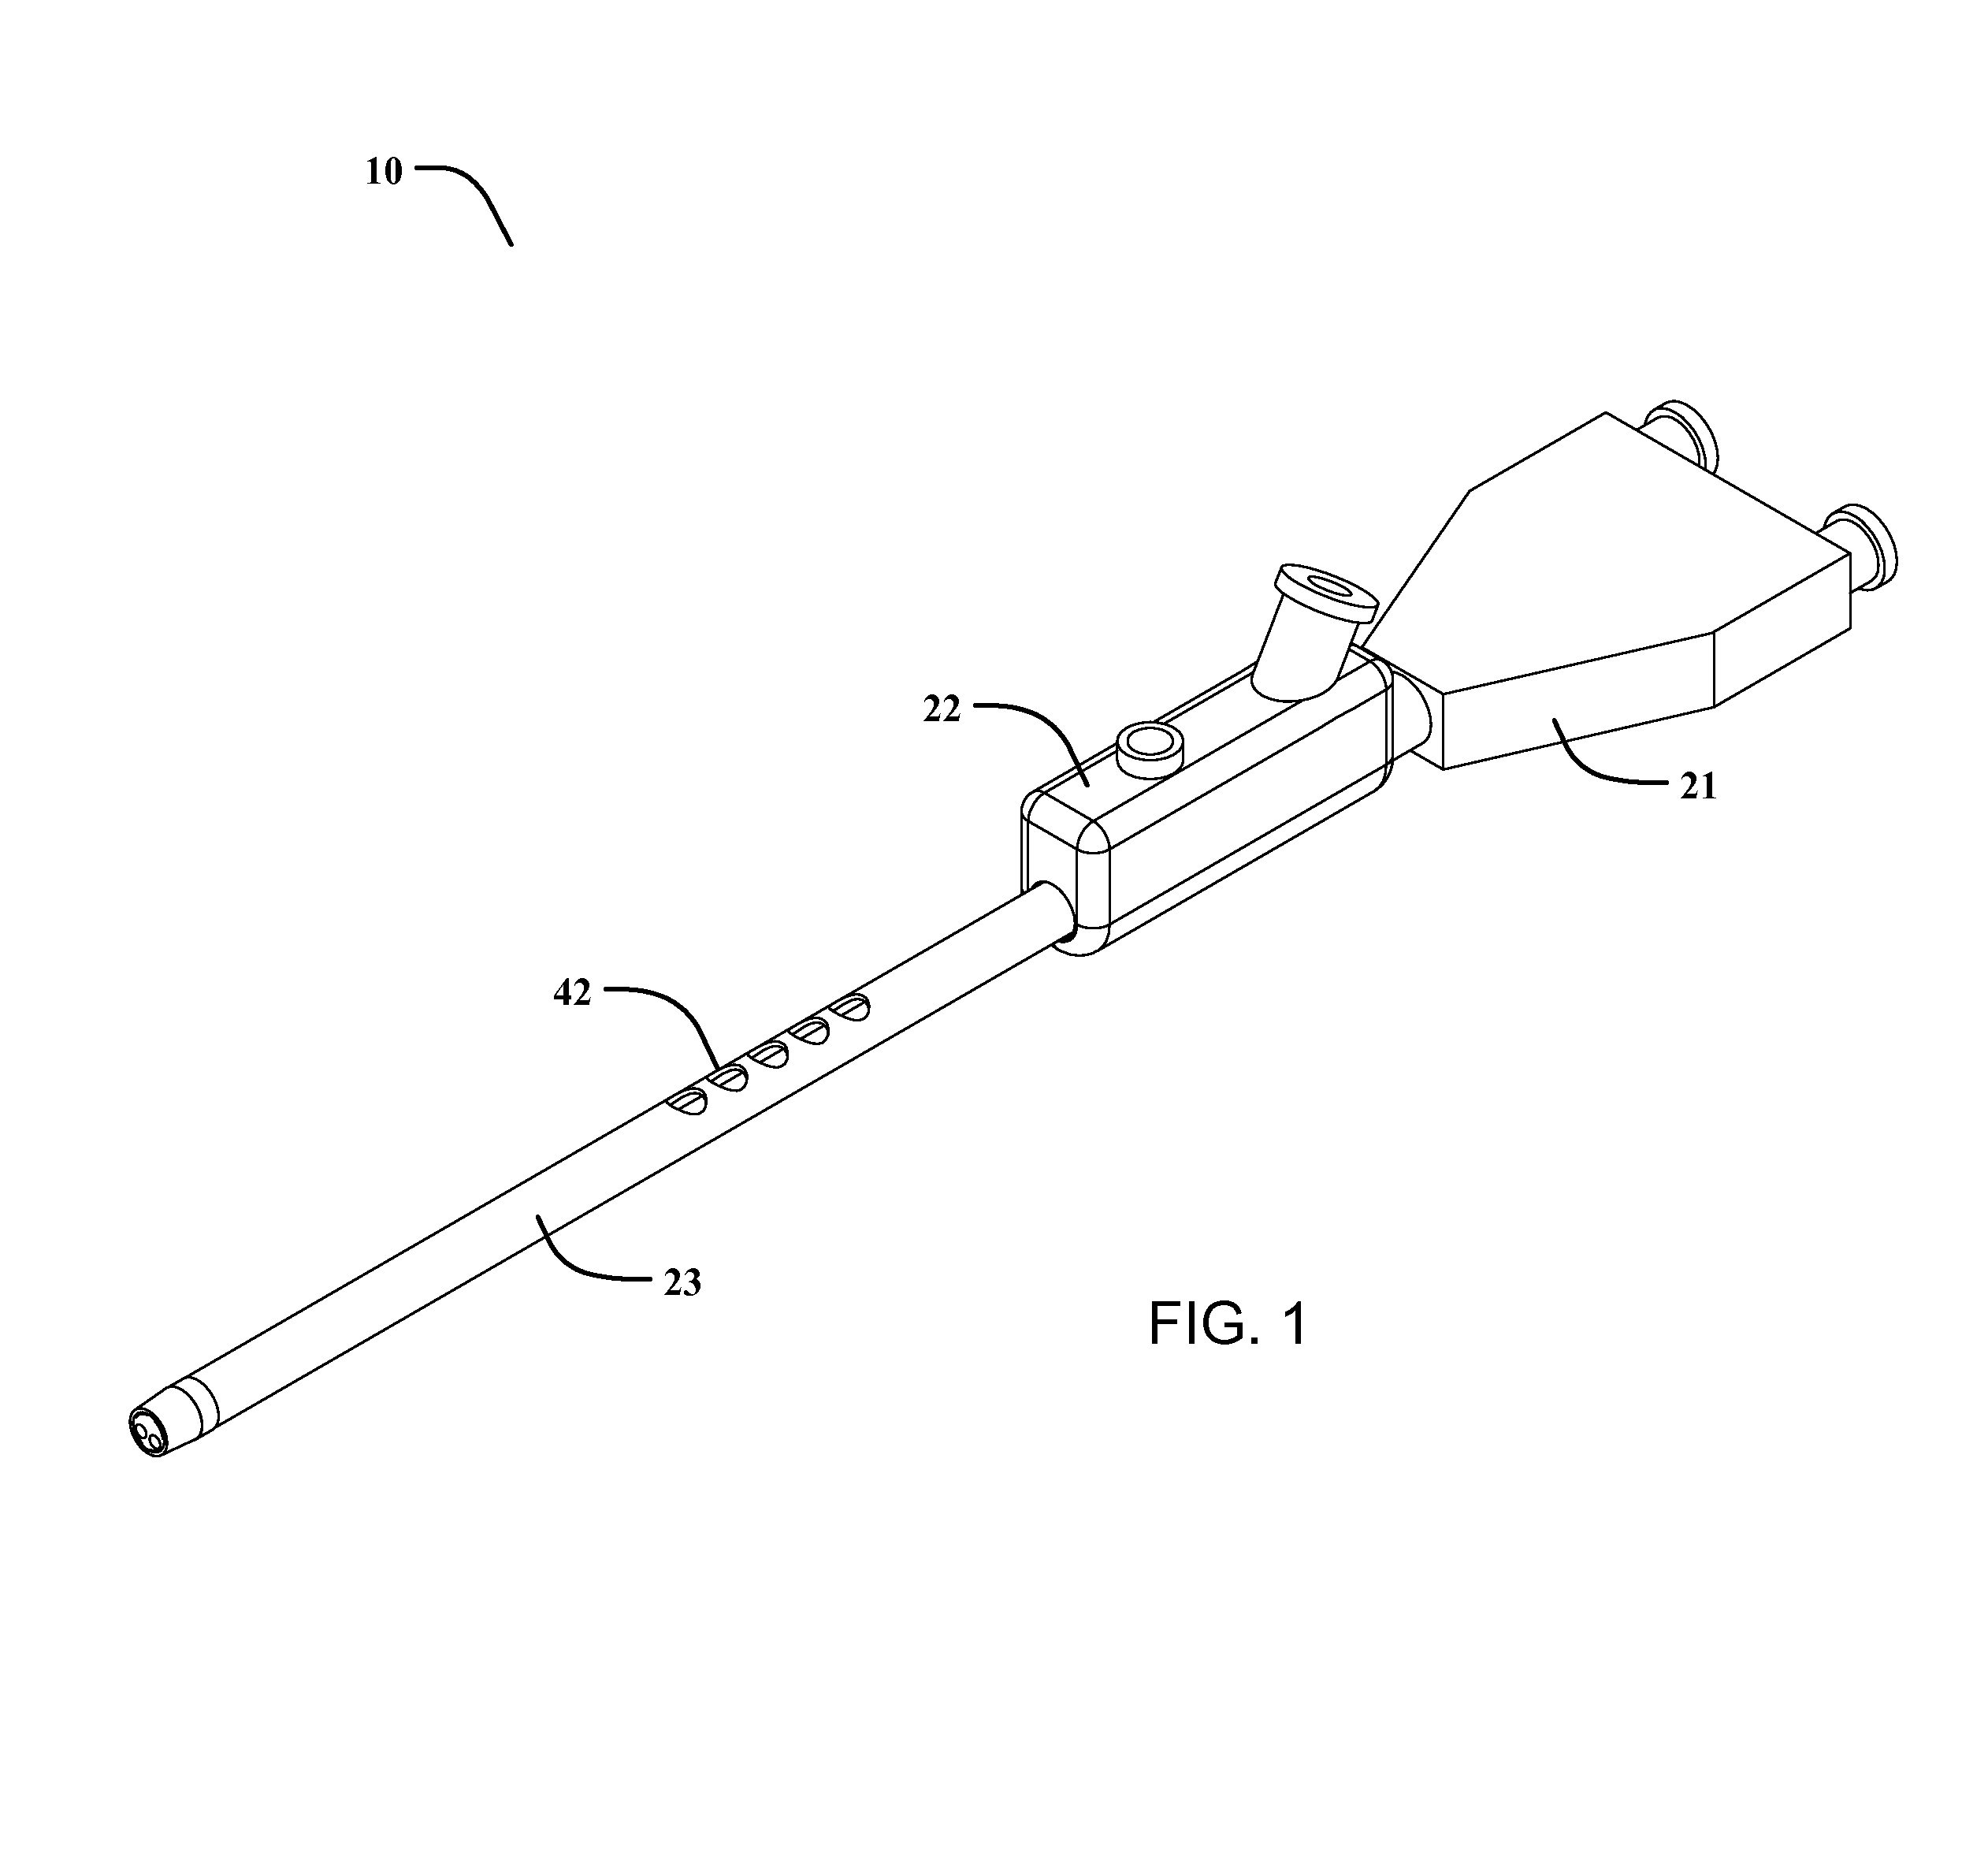 Method and apparatus for a self-venting endoscopic biomaterial applicator